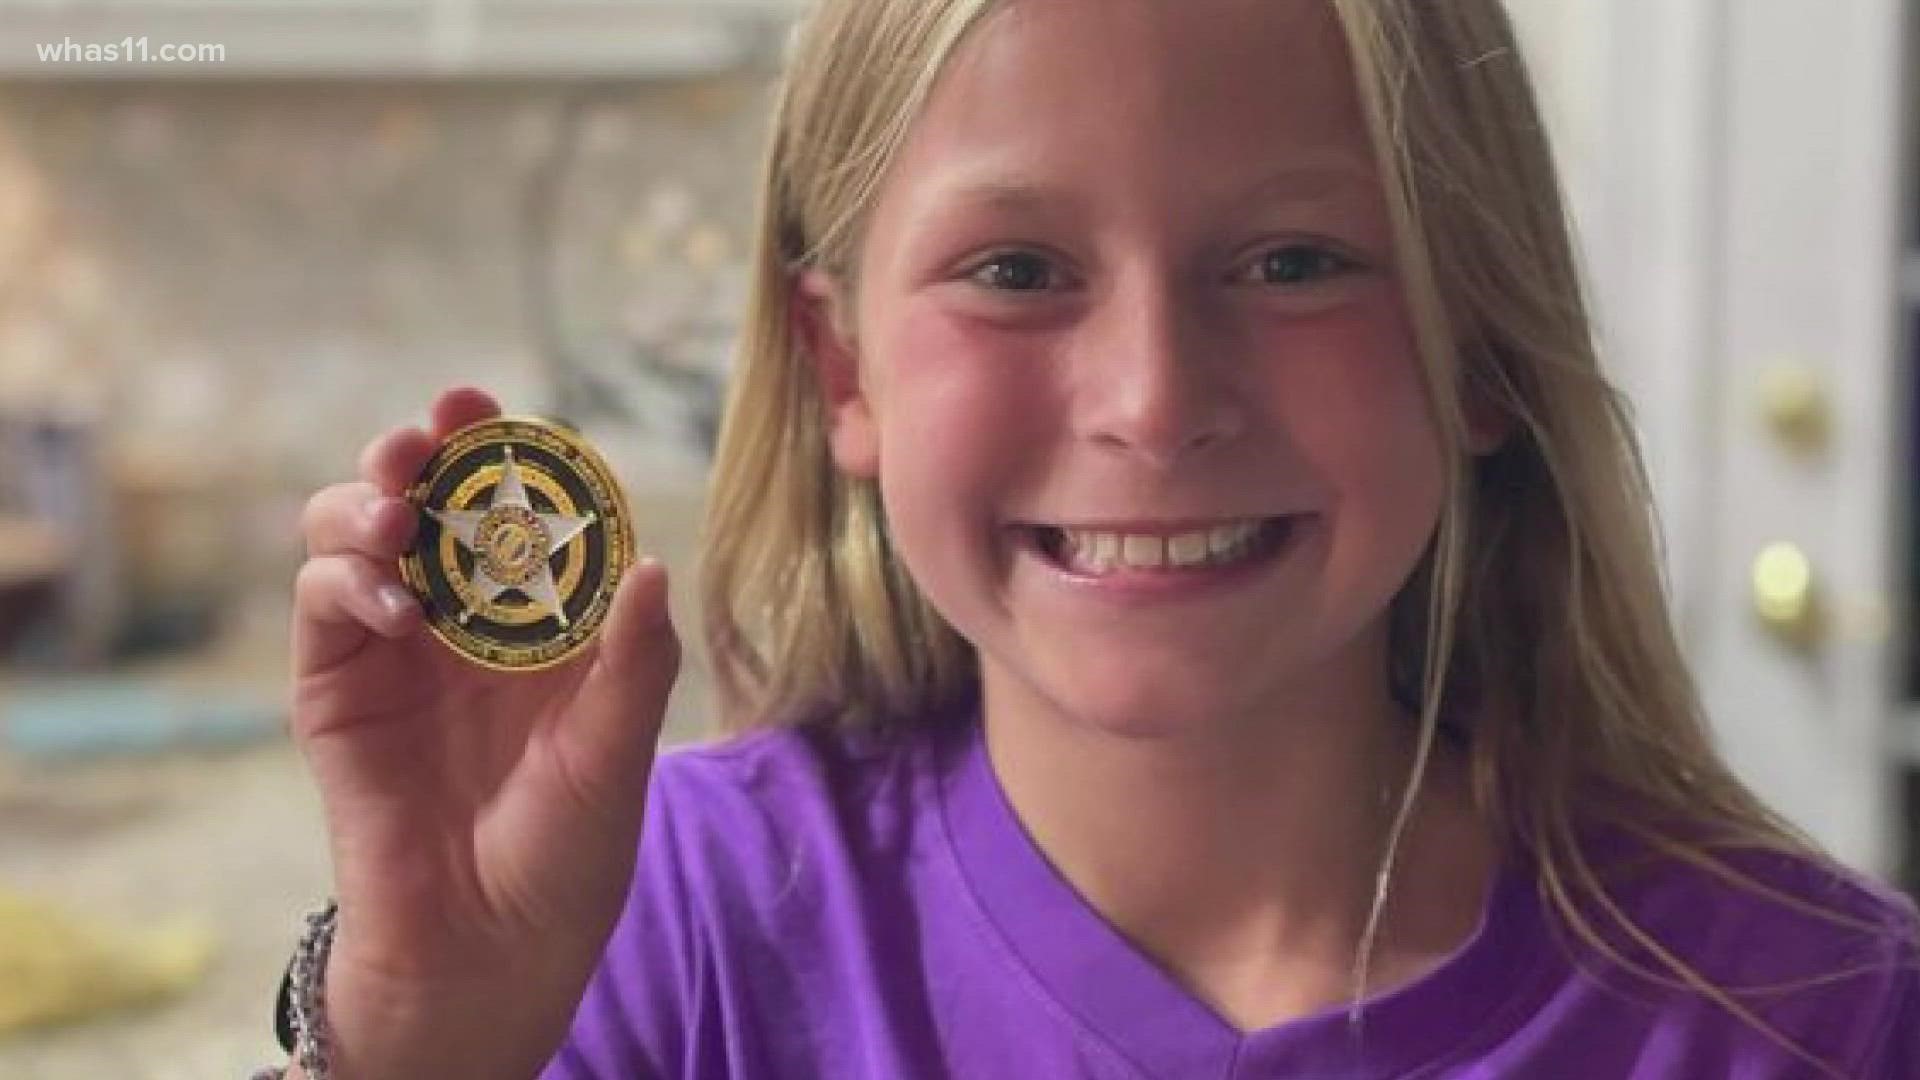 The Nelson County Sheriff was so impressed with Laken's bravery, he gave her the Sheriff's Office Challenge coin.